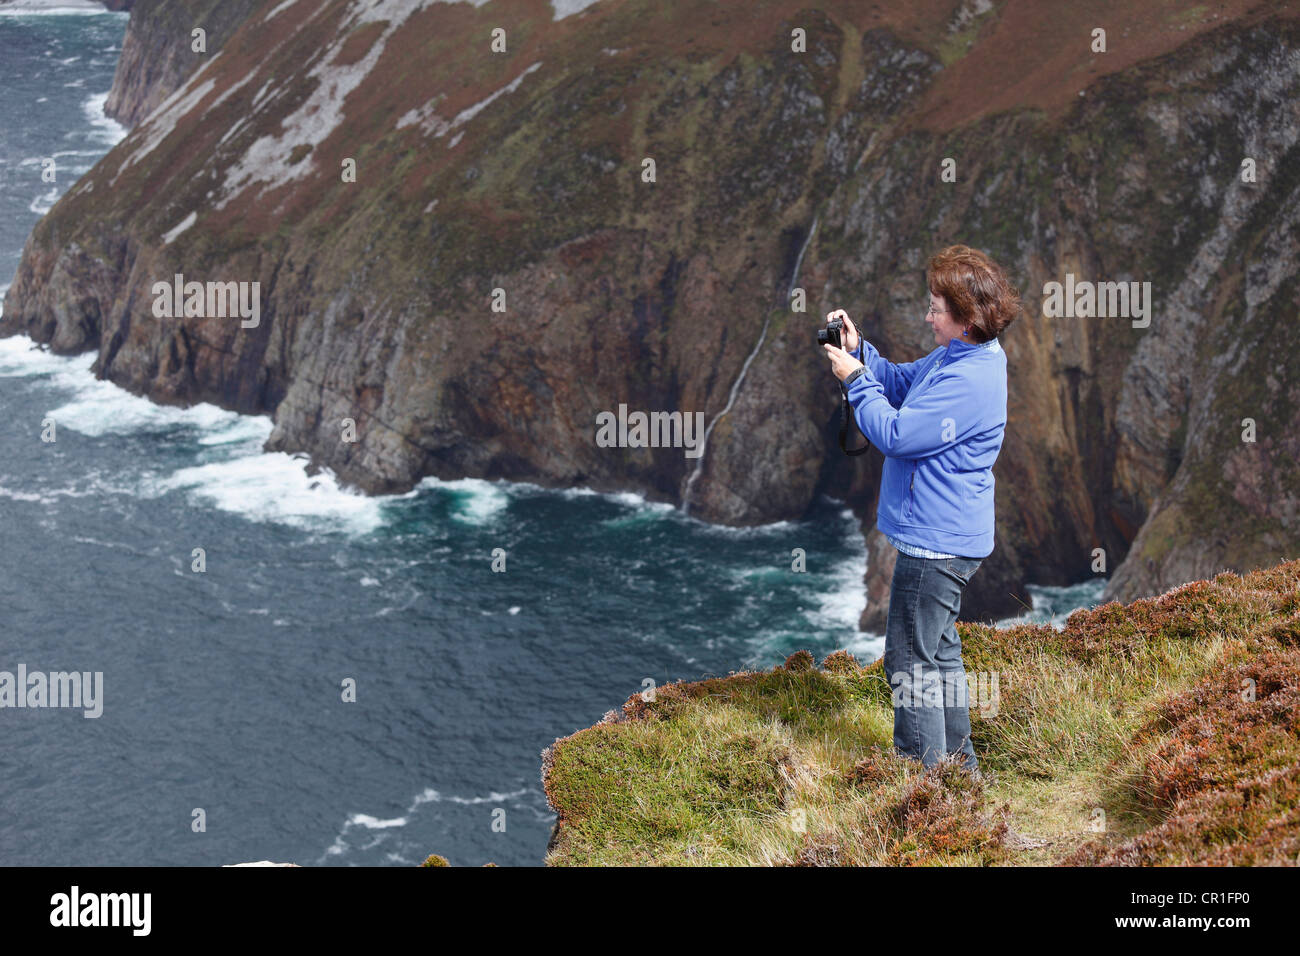 Woman taking pictures with a digital compact camera, at the cliffs of Slieve League, County Donegal, Ireland, Europe Stock Photo